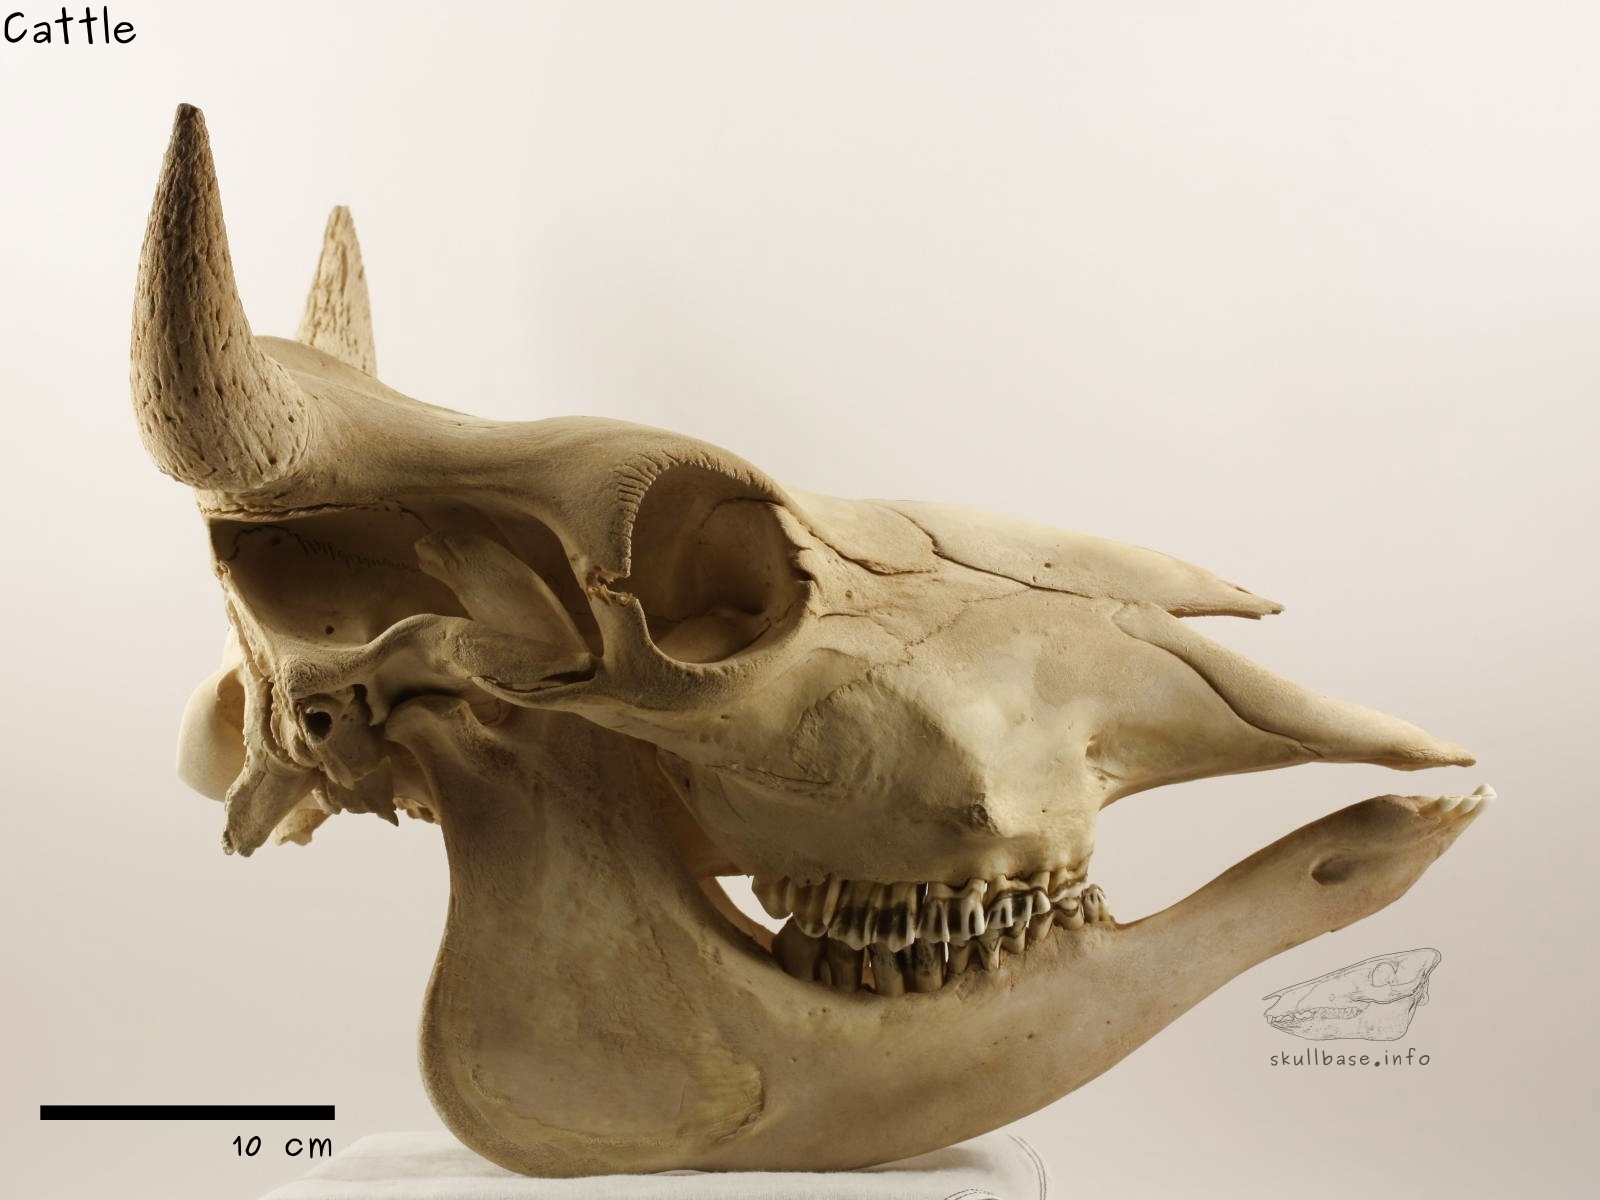 Cattle (Bos taurus) skull lateral view